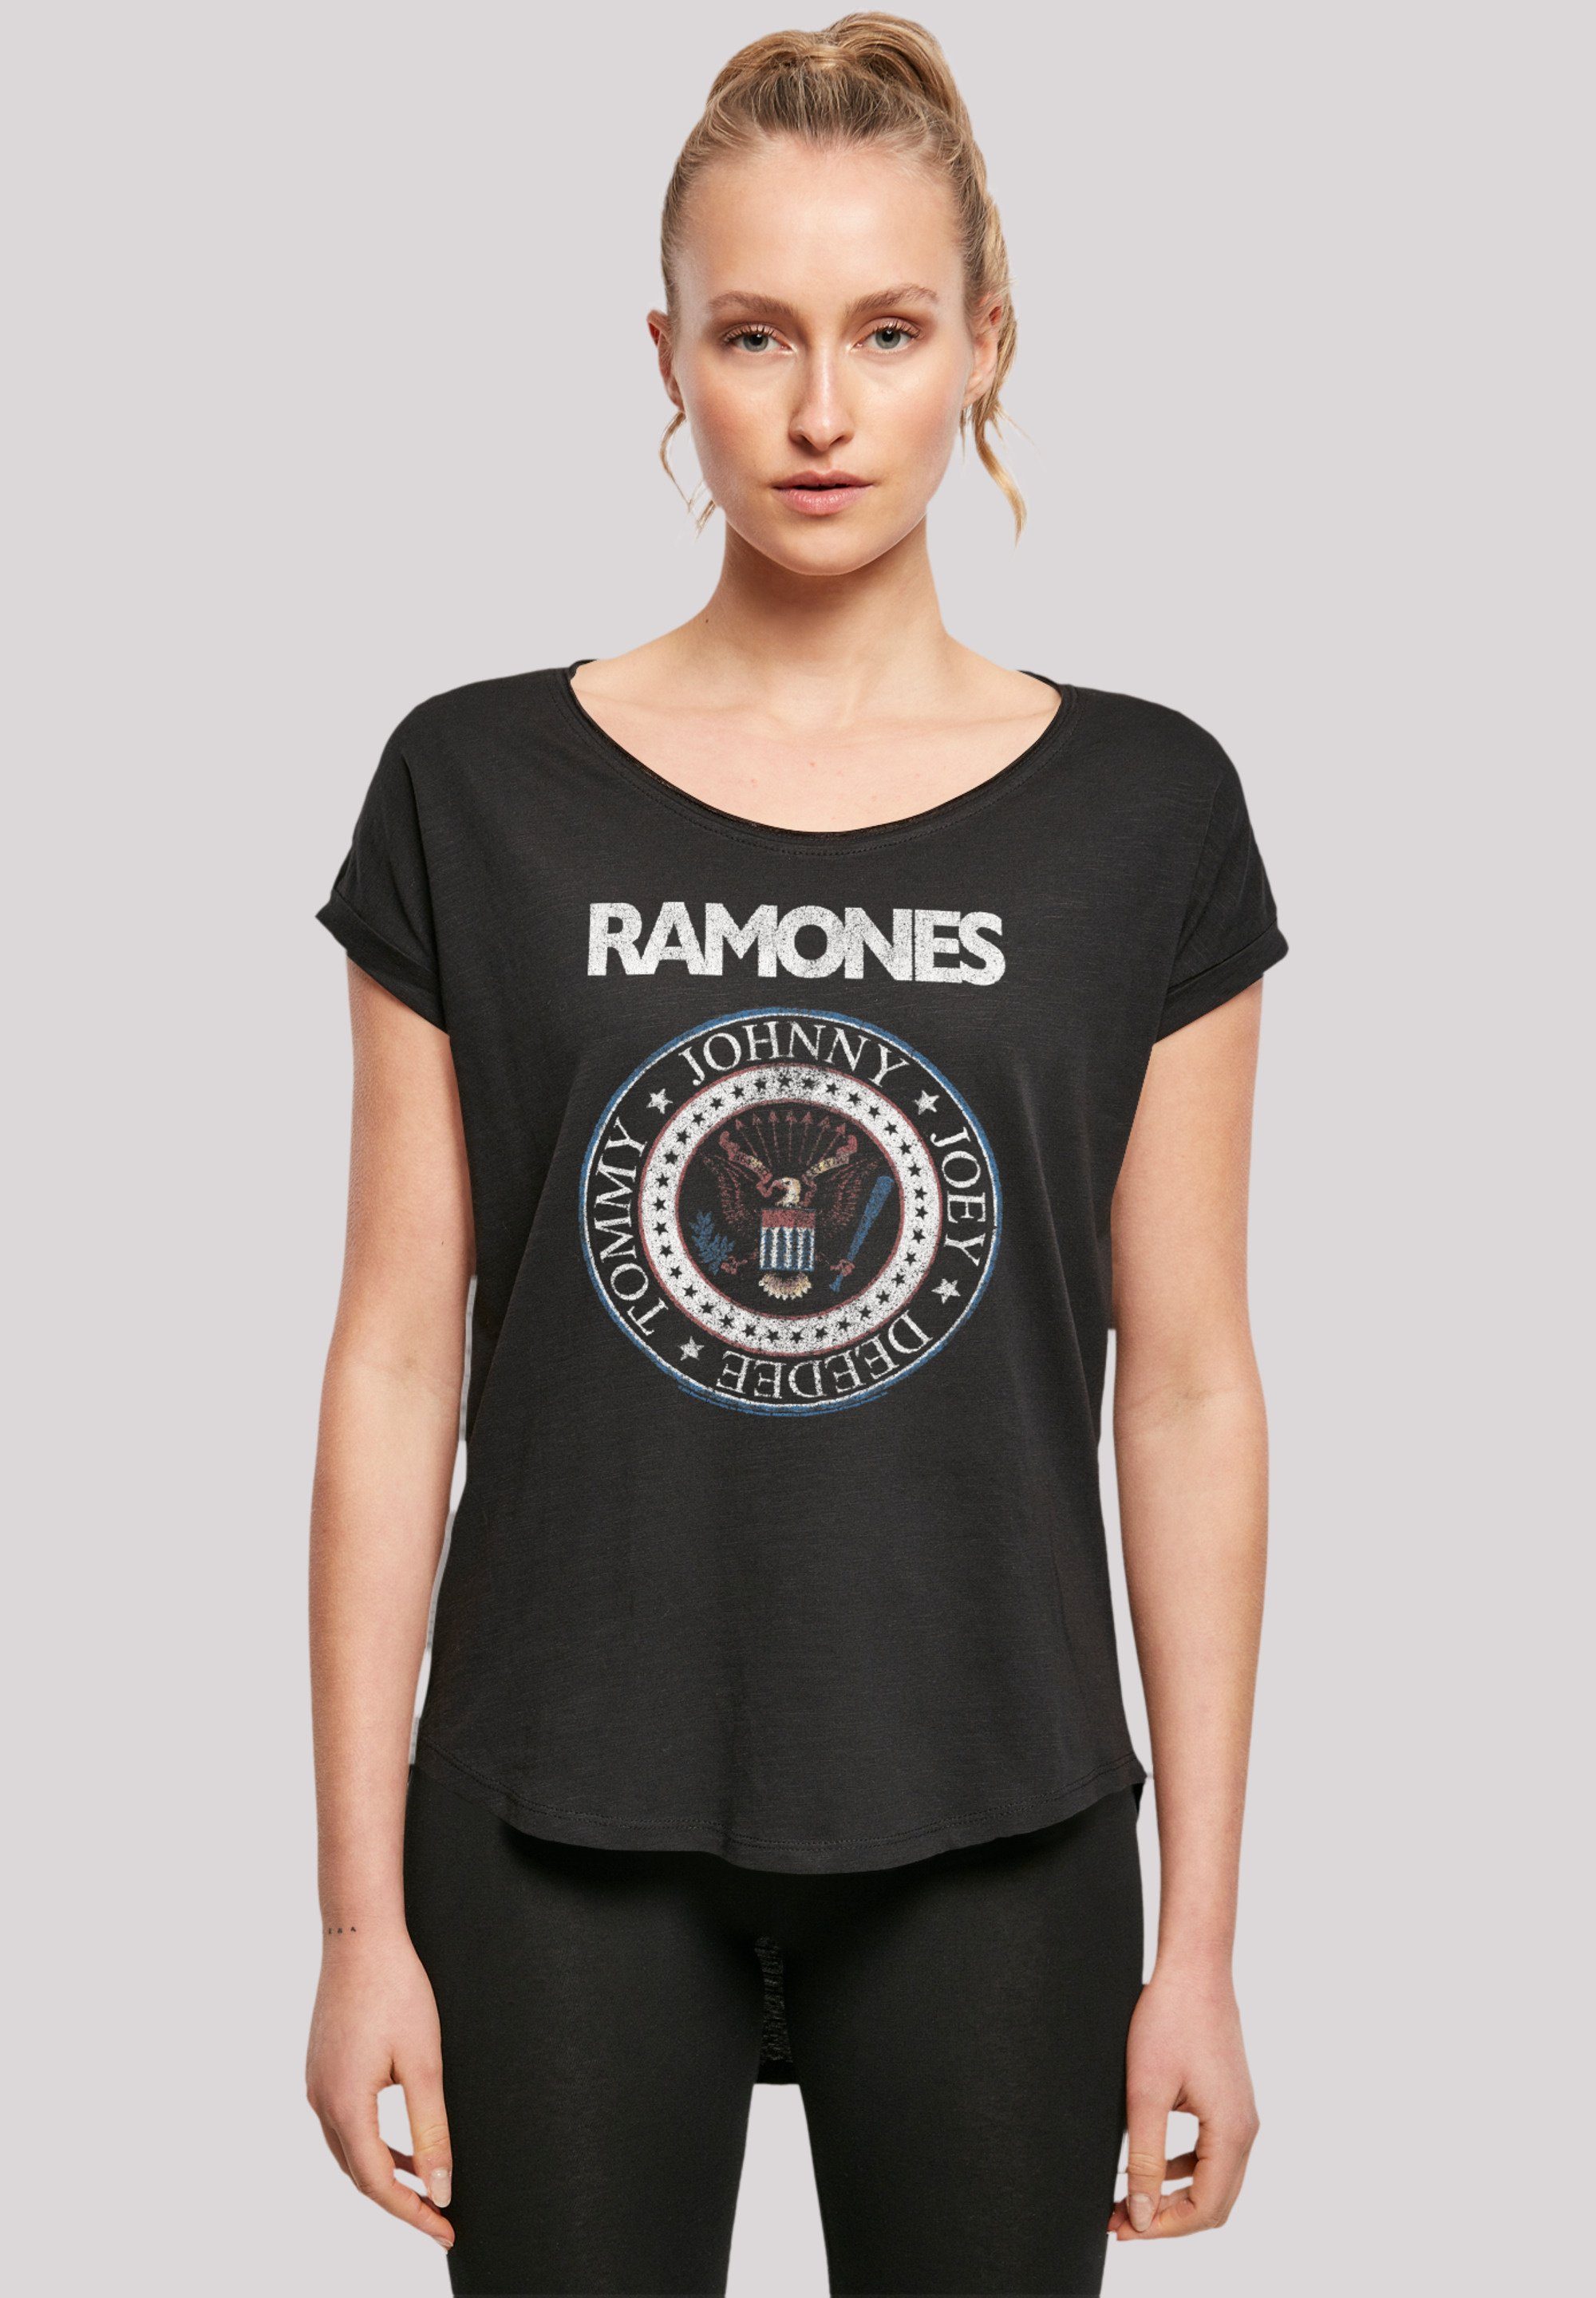 F4NT4STIC Premium Musik White Seal T-Shirt And Rock Qualität, Red Band, Rock-Musik Band Ramones